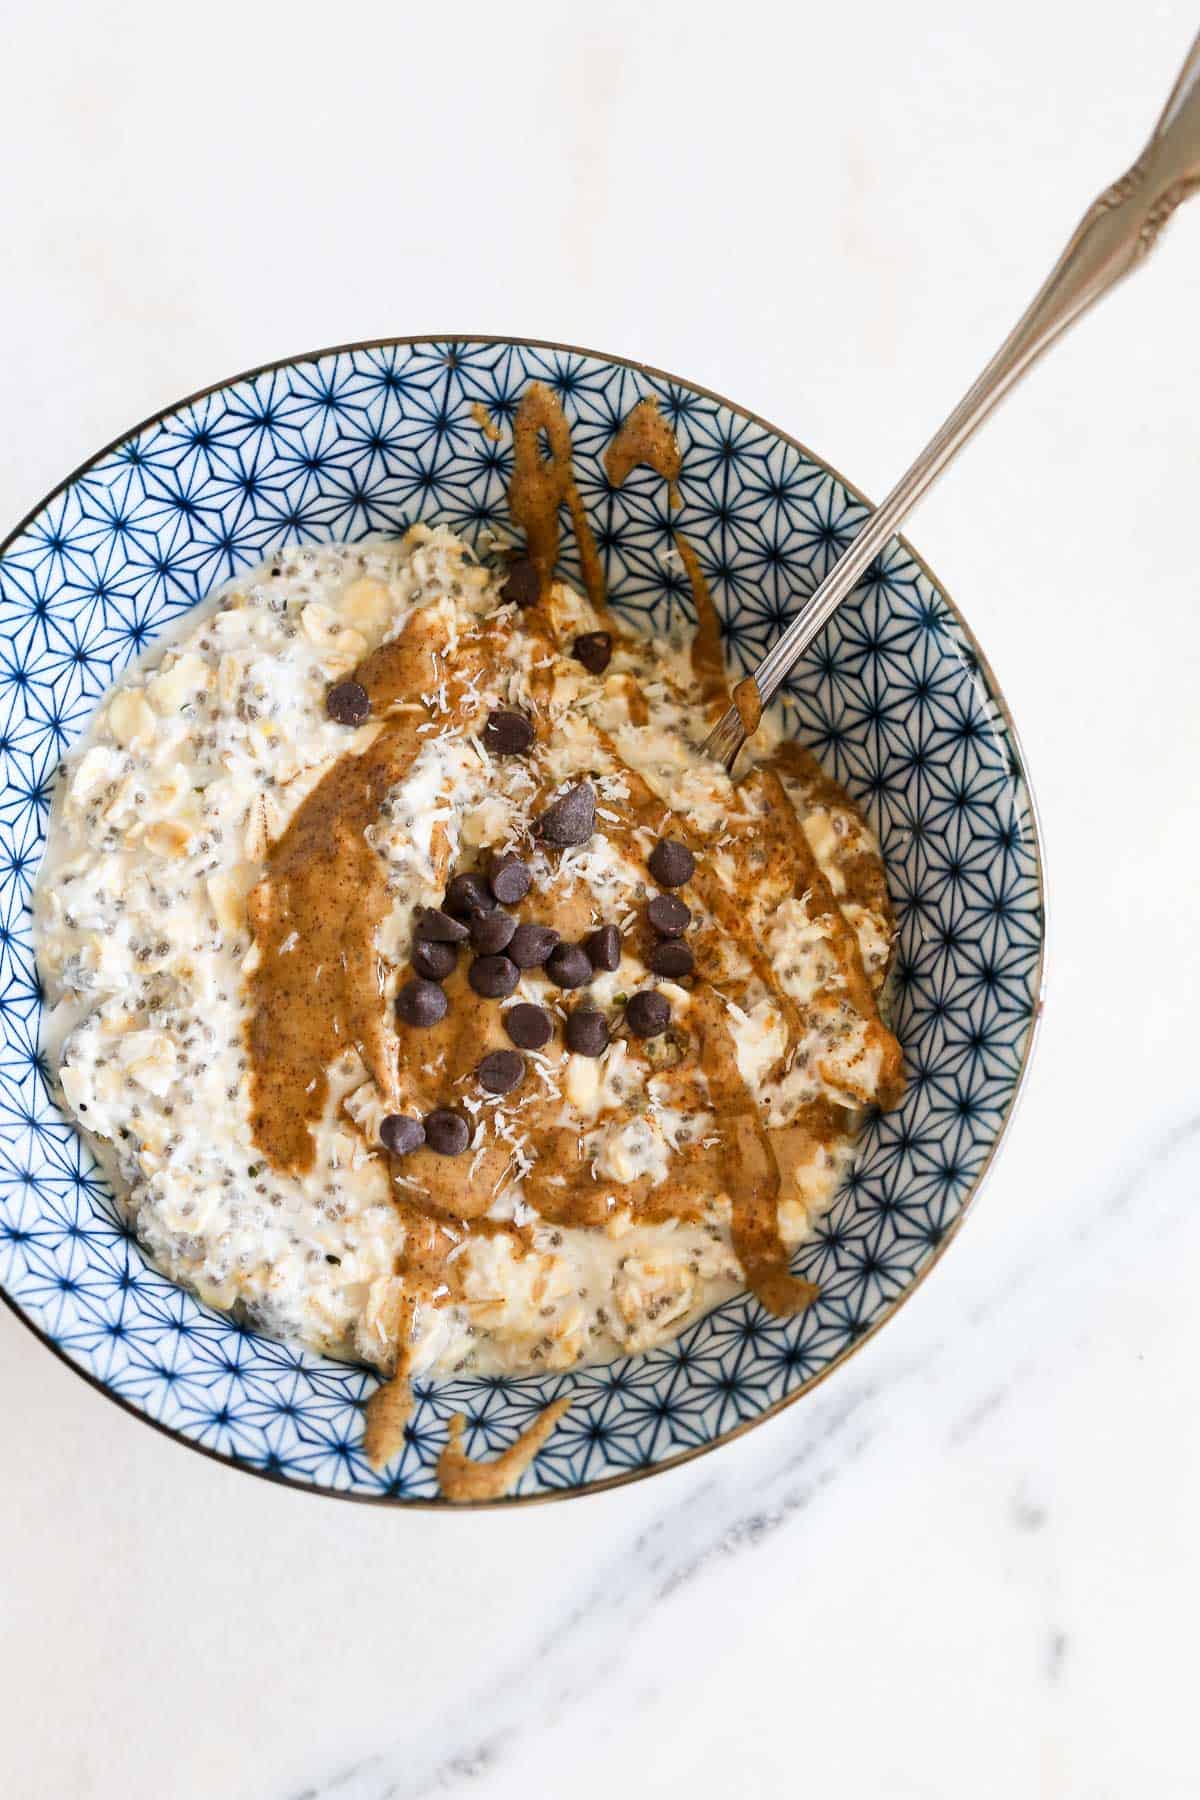 A blue and white printed bowl with coconut overnight oats in it topped with almond butter and chocolate chips sitting on a marble background.